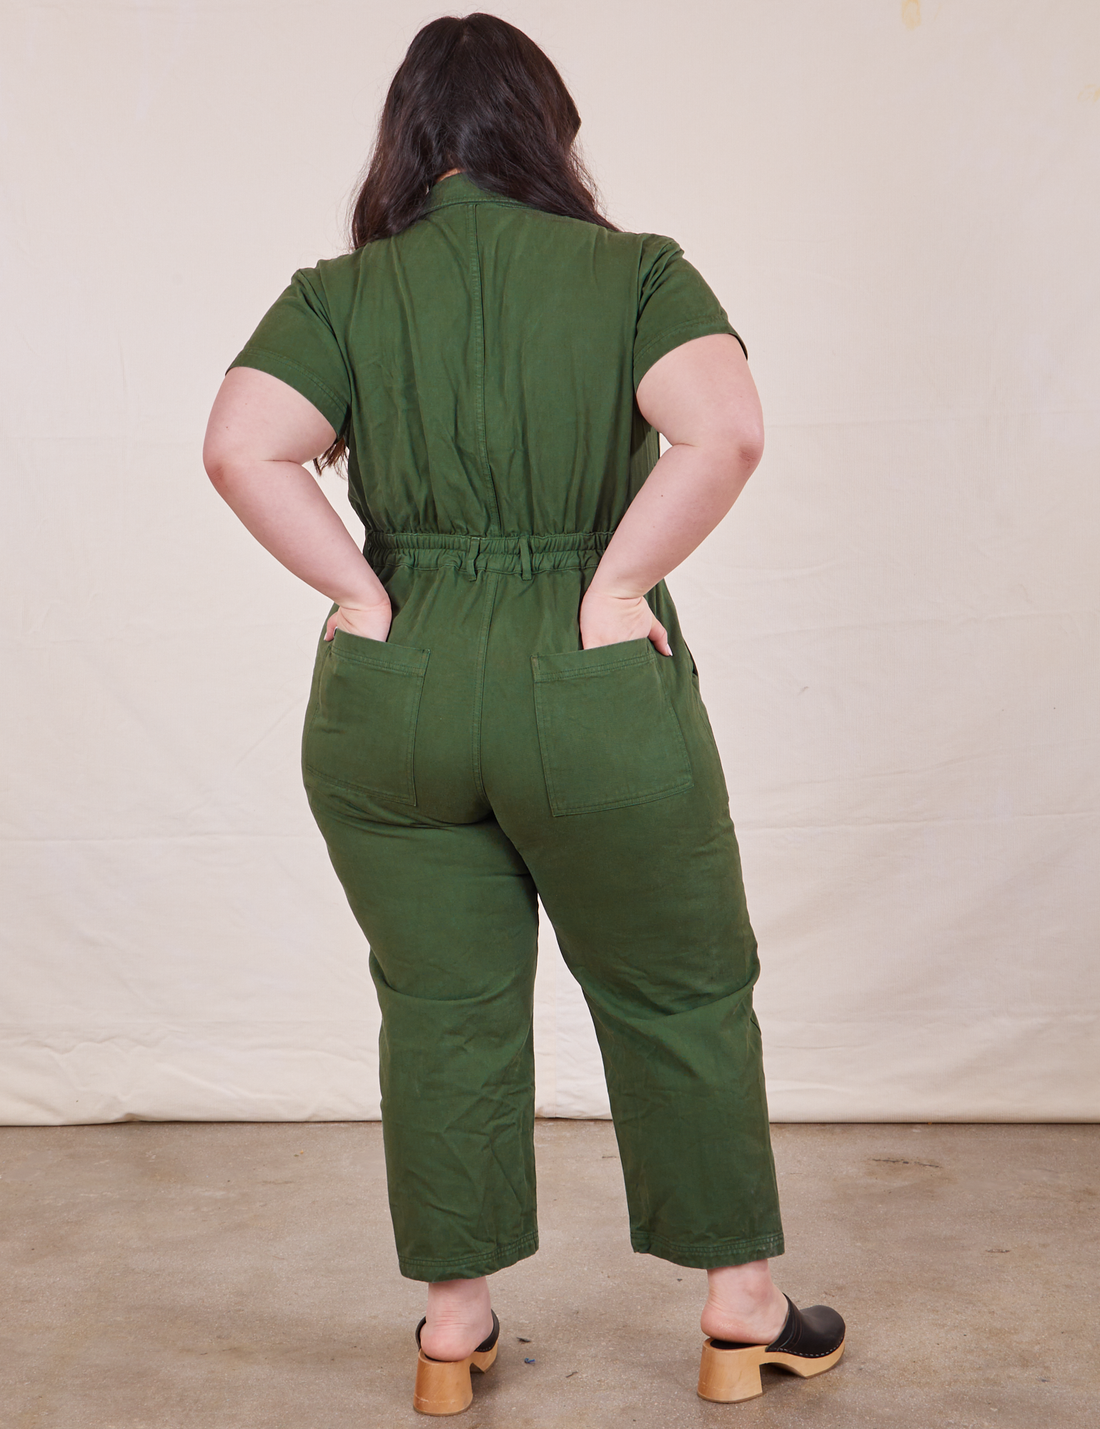 Petite Short Sleeve Jumpsuit in Dark Emerald Green back view on Ashley